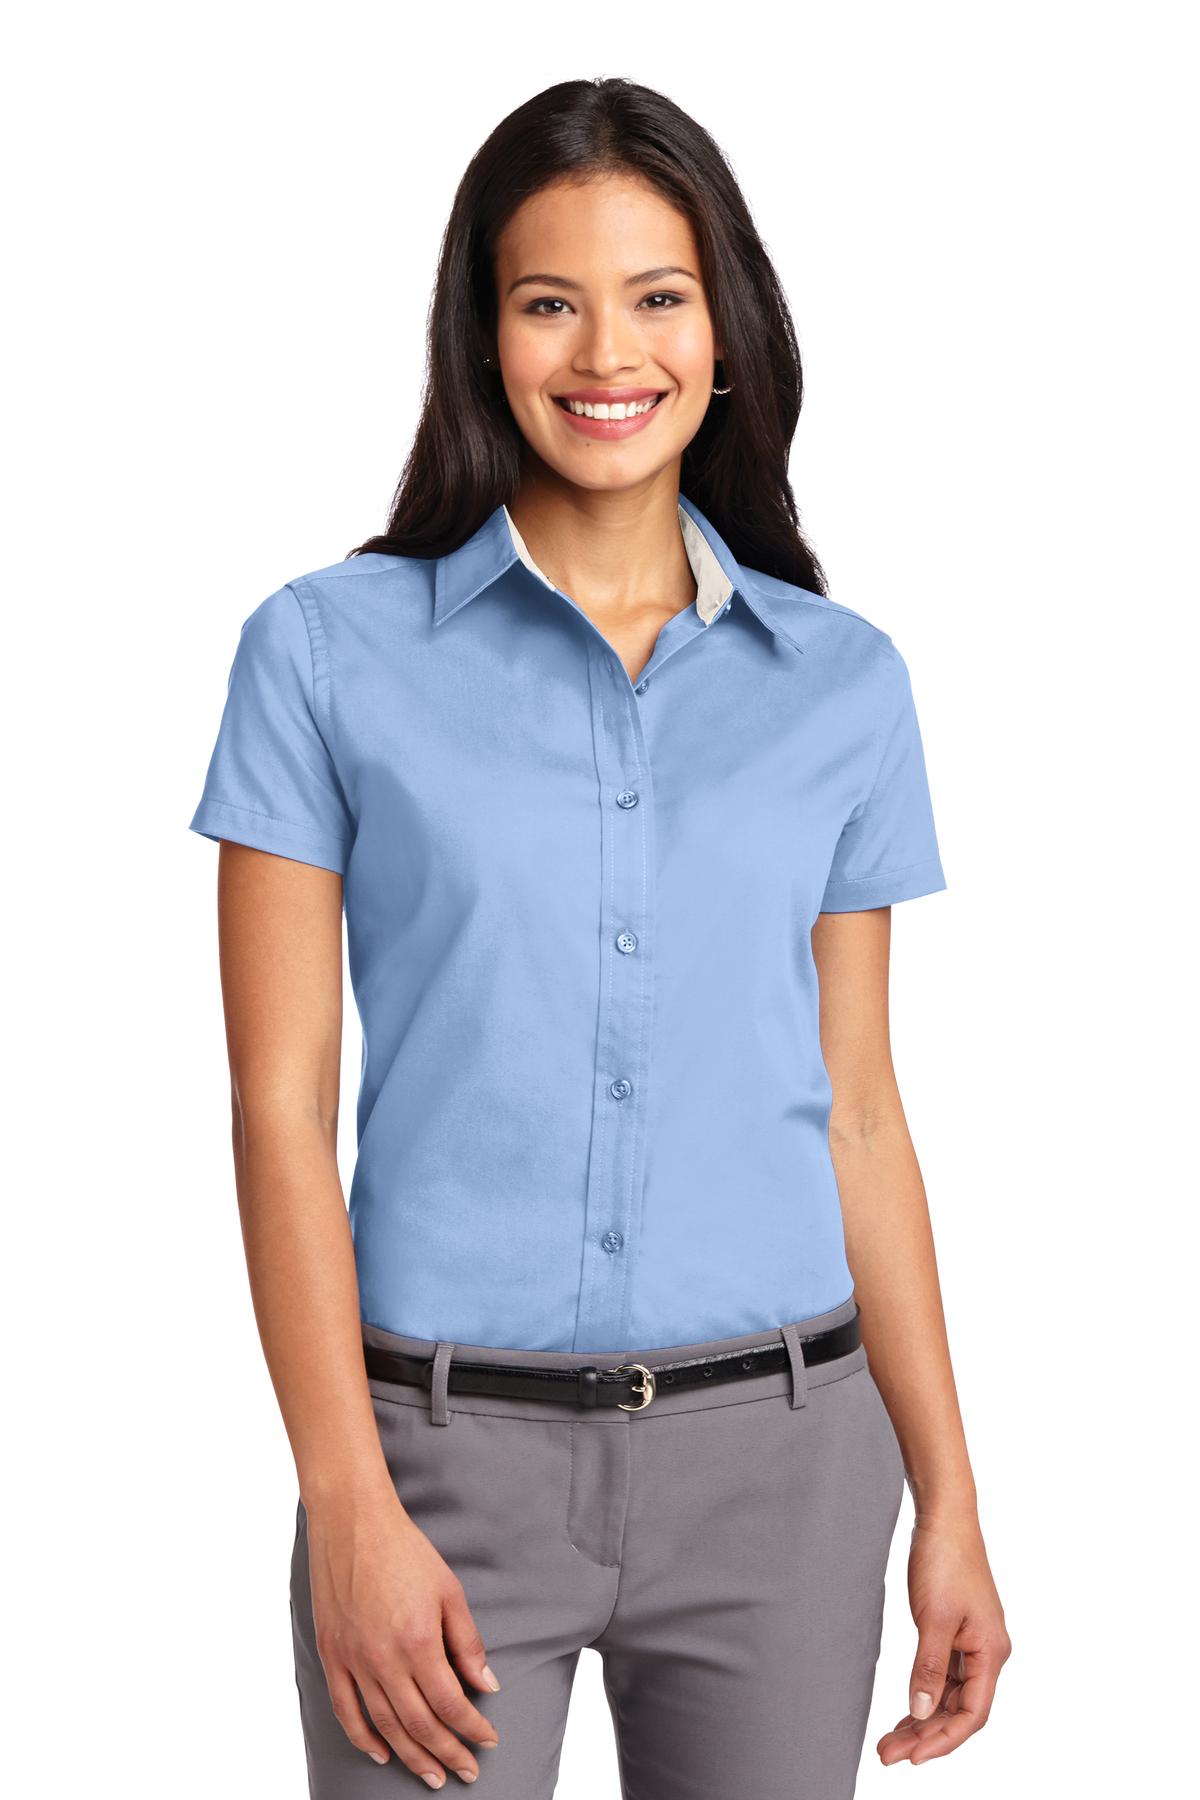 Port Authority WomenS Short Sleeve Easy Care Shirt. L508. - image 1 of 6